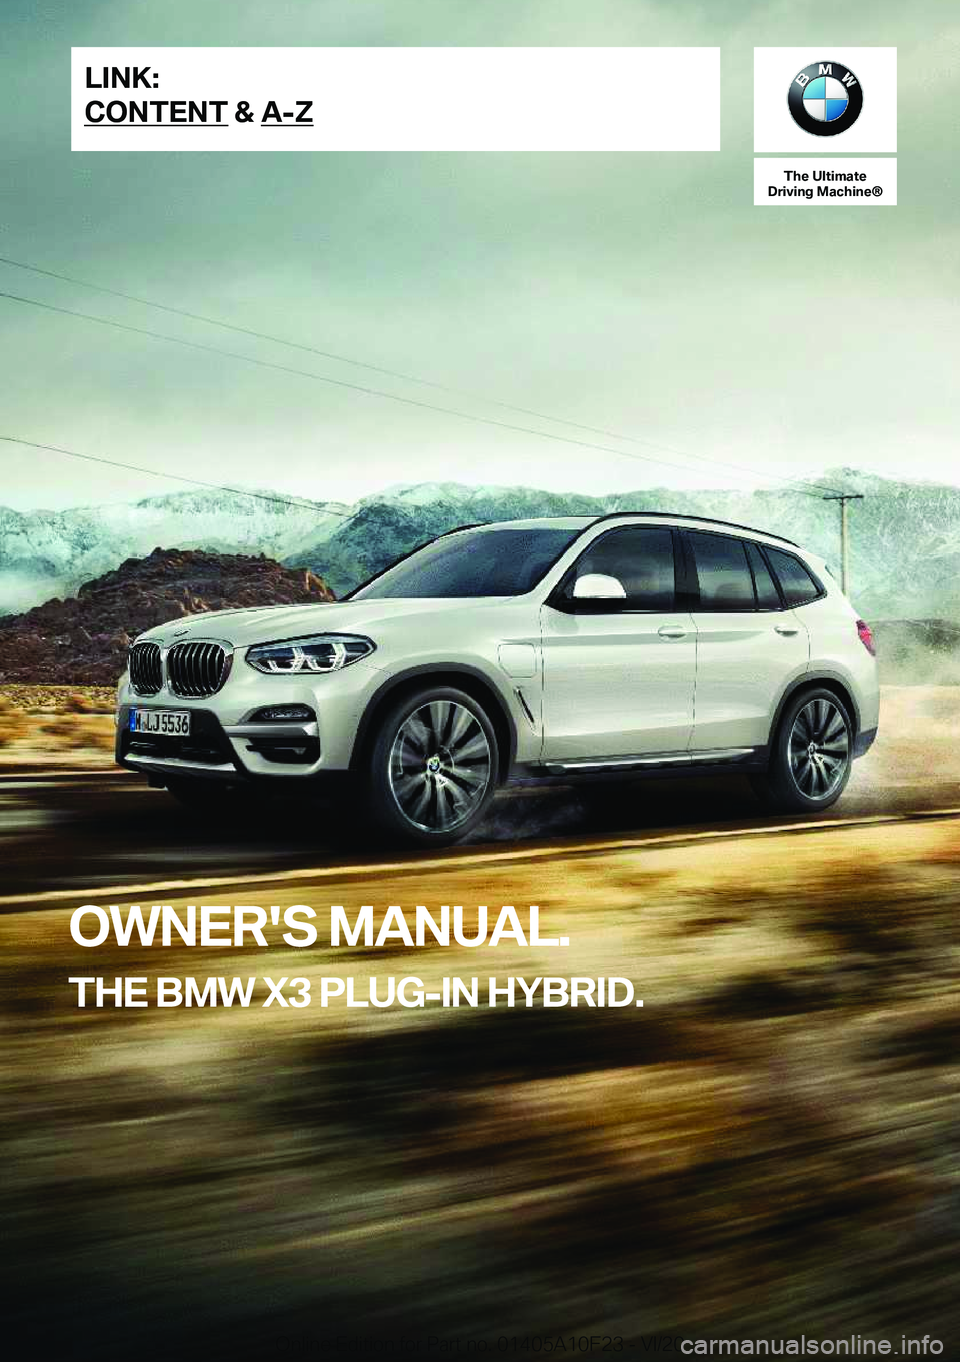 BMW X3 PLUG-IN HYBRID 2021  Owners Manual �T�h�e��U�l�t�i�m�a�t�e
�D�r�i�v�i�n�g��M�a�c�h�i�n�e�n
�O�W�N�E�R�'�S��M�A�N�U�A�L�.
�T�H�E��B�M�W��X�3��P�L�U�G�-�I�N��H�Y�B�R�I�D�.�L�I�N�K�:
�C�O�N�T�E�N�T��&��A�-�Z�O�n�l�i�n�e��E�d